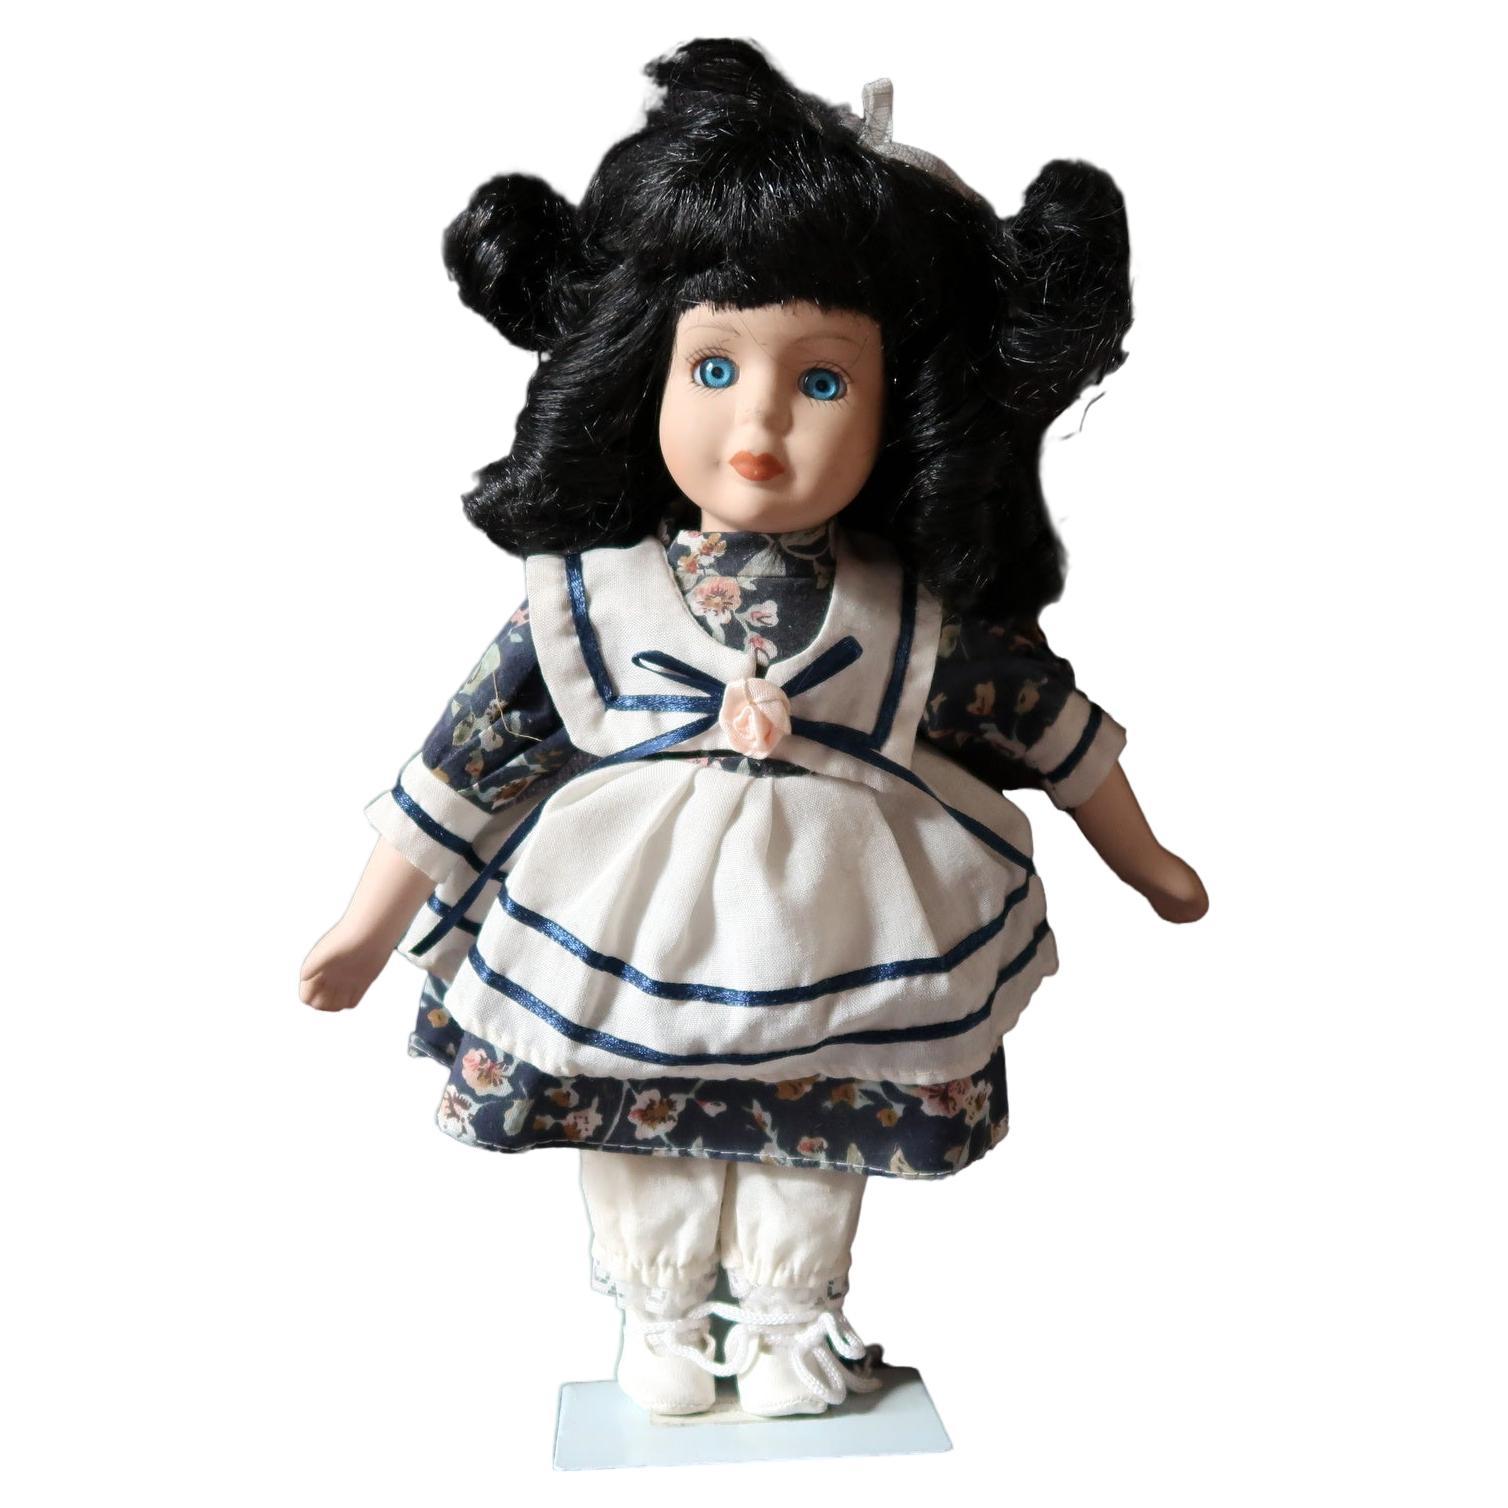 Elegant Vintage Porcelain Doll, Blue and White Beauty from the 20th century 2C05 For Sale